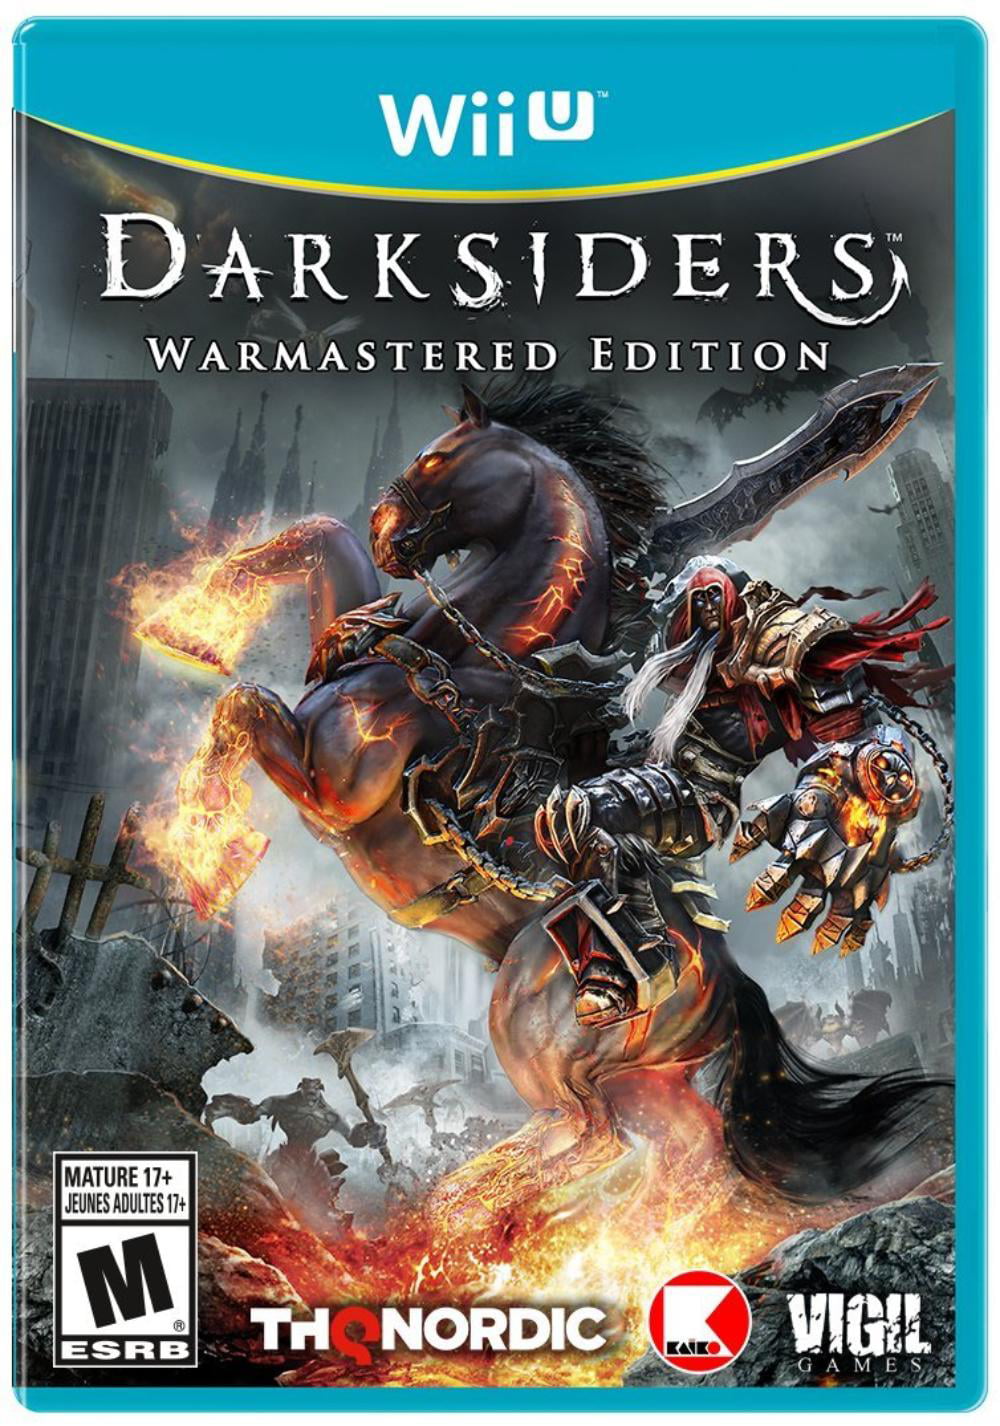 Darksiders Warmastered Edition Wii U Wii U Native 1080p Rendering Fully Reworked And Improved Graphics And 30 Fps Gameplay By Visit The Thq Nordic Store Walmart Com